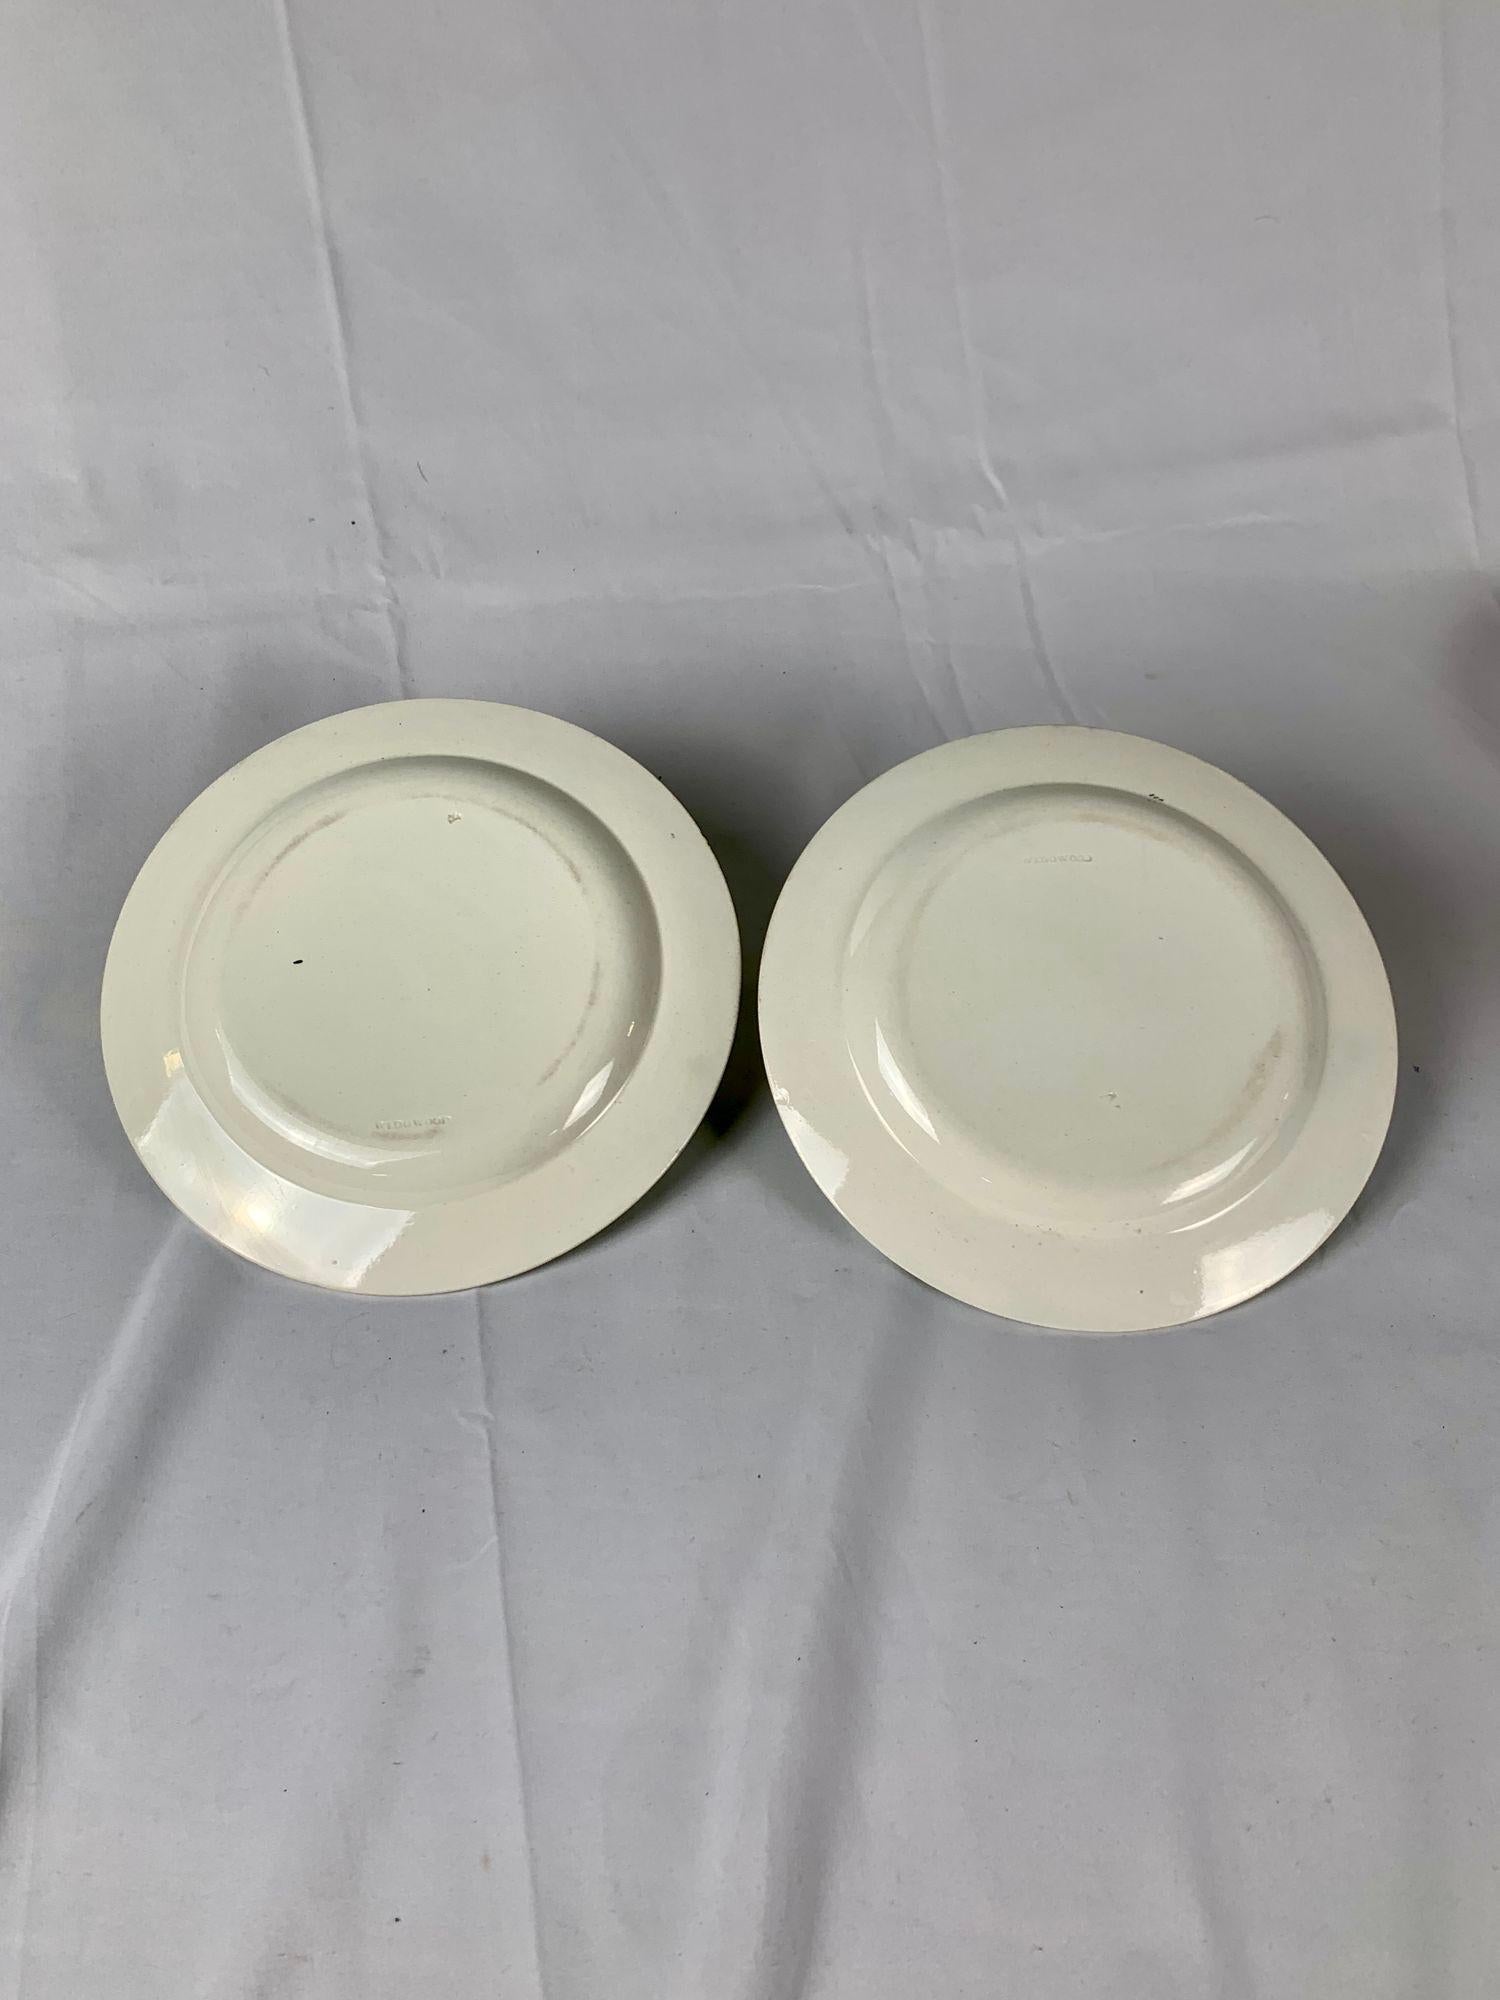 Pair Wedgwood Creamware Dishes Hand Painted England Circa 1810 In Excellent Condition For Sale In Katonah, NY